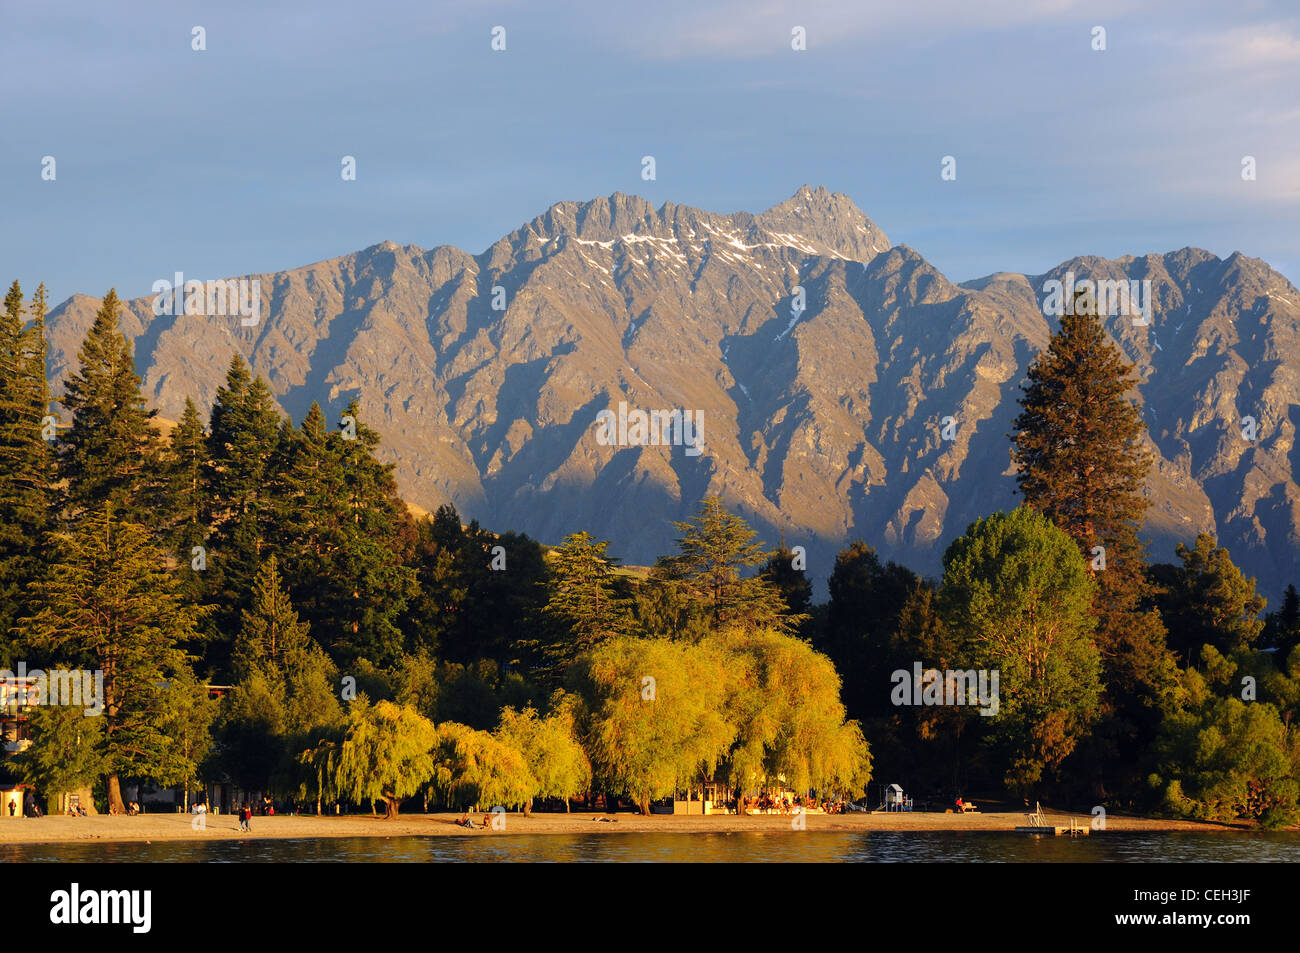 The Remarkables mountains near Queenstown, New Zealand Stock Photo